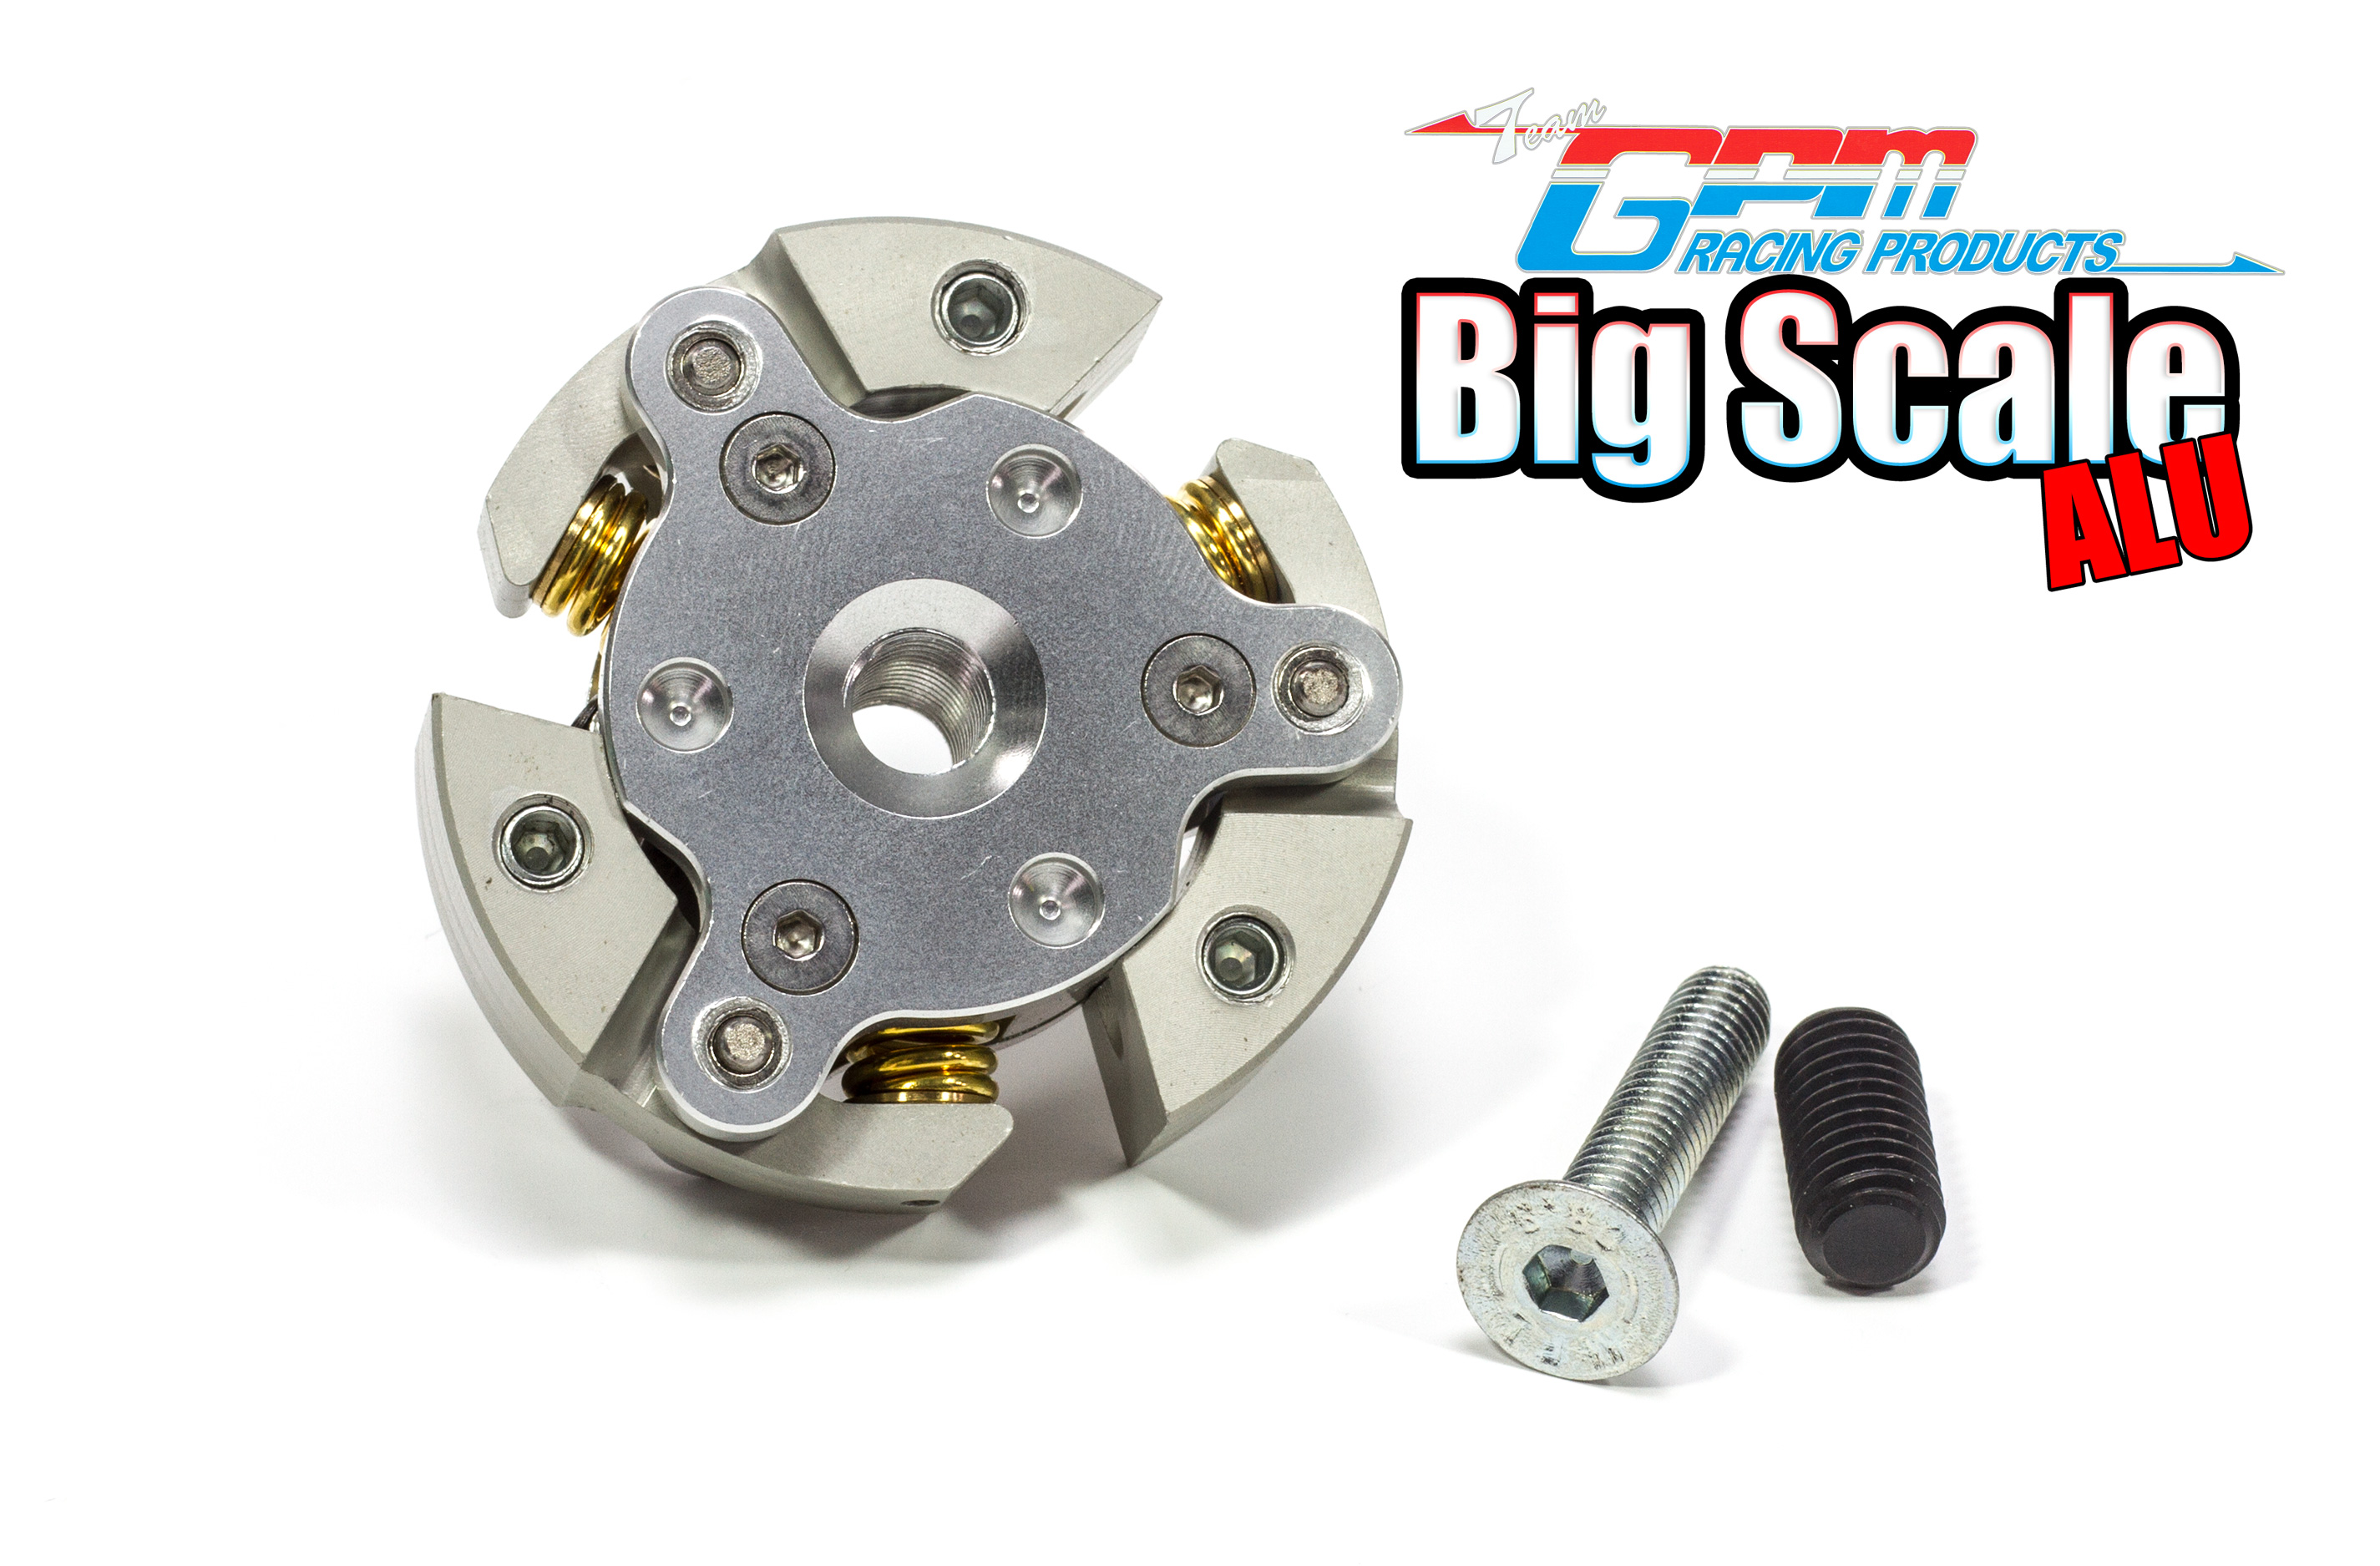 y0739 GPM Big Scale-ALLOY adjustable 3 block clutch for 1/5 scale On-Road models